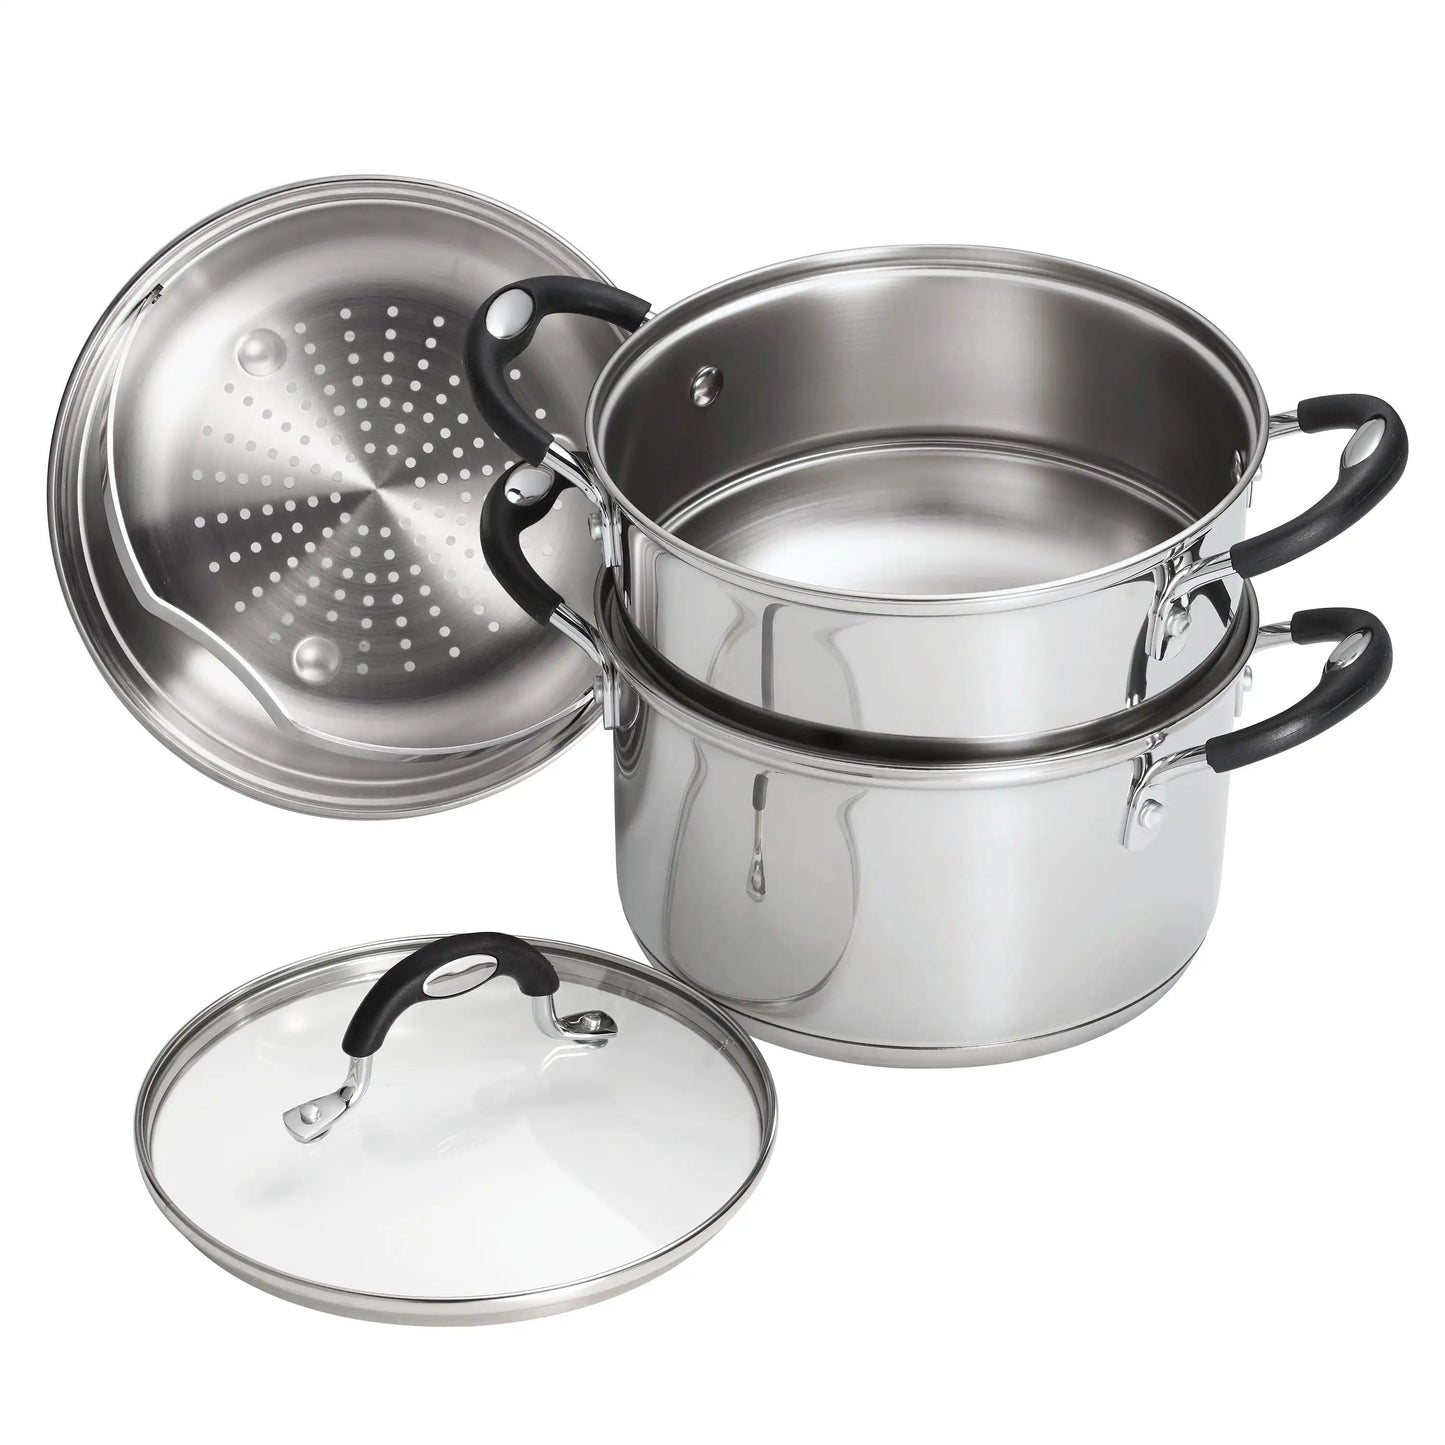 Stainless Steel 3 Quart Steamer™ & Double-Boiler with Handle 4 Piece